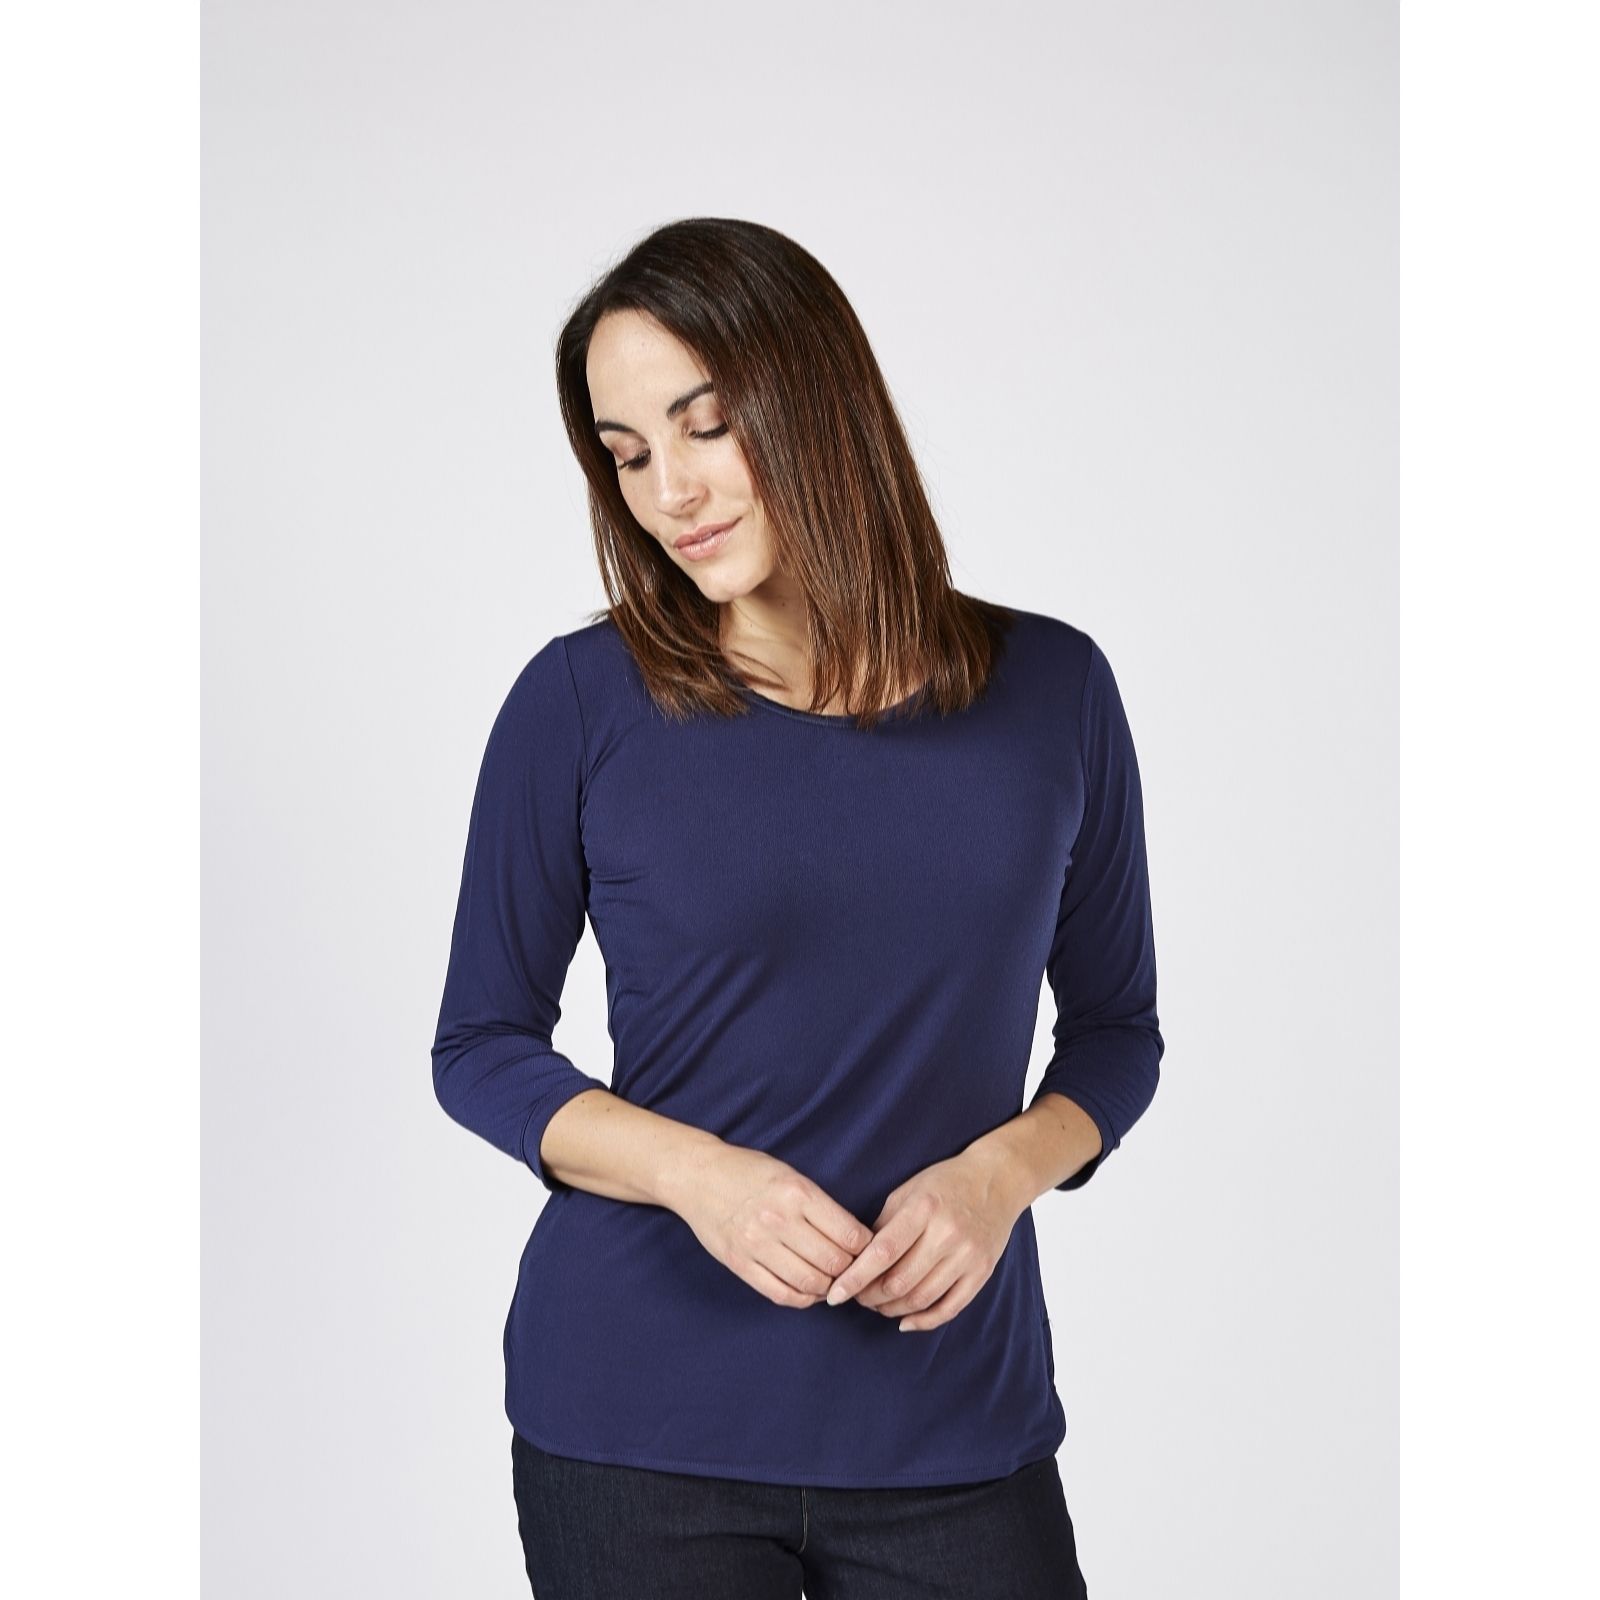 Outlet Ruth Langsford Stretch Crepe Plain 3/4 Sleeve Zip Back Top - QVC UK